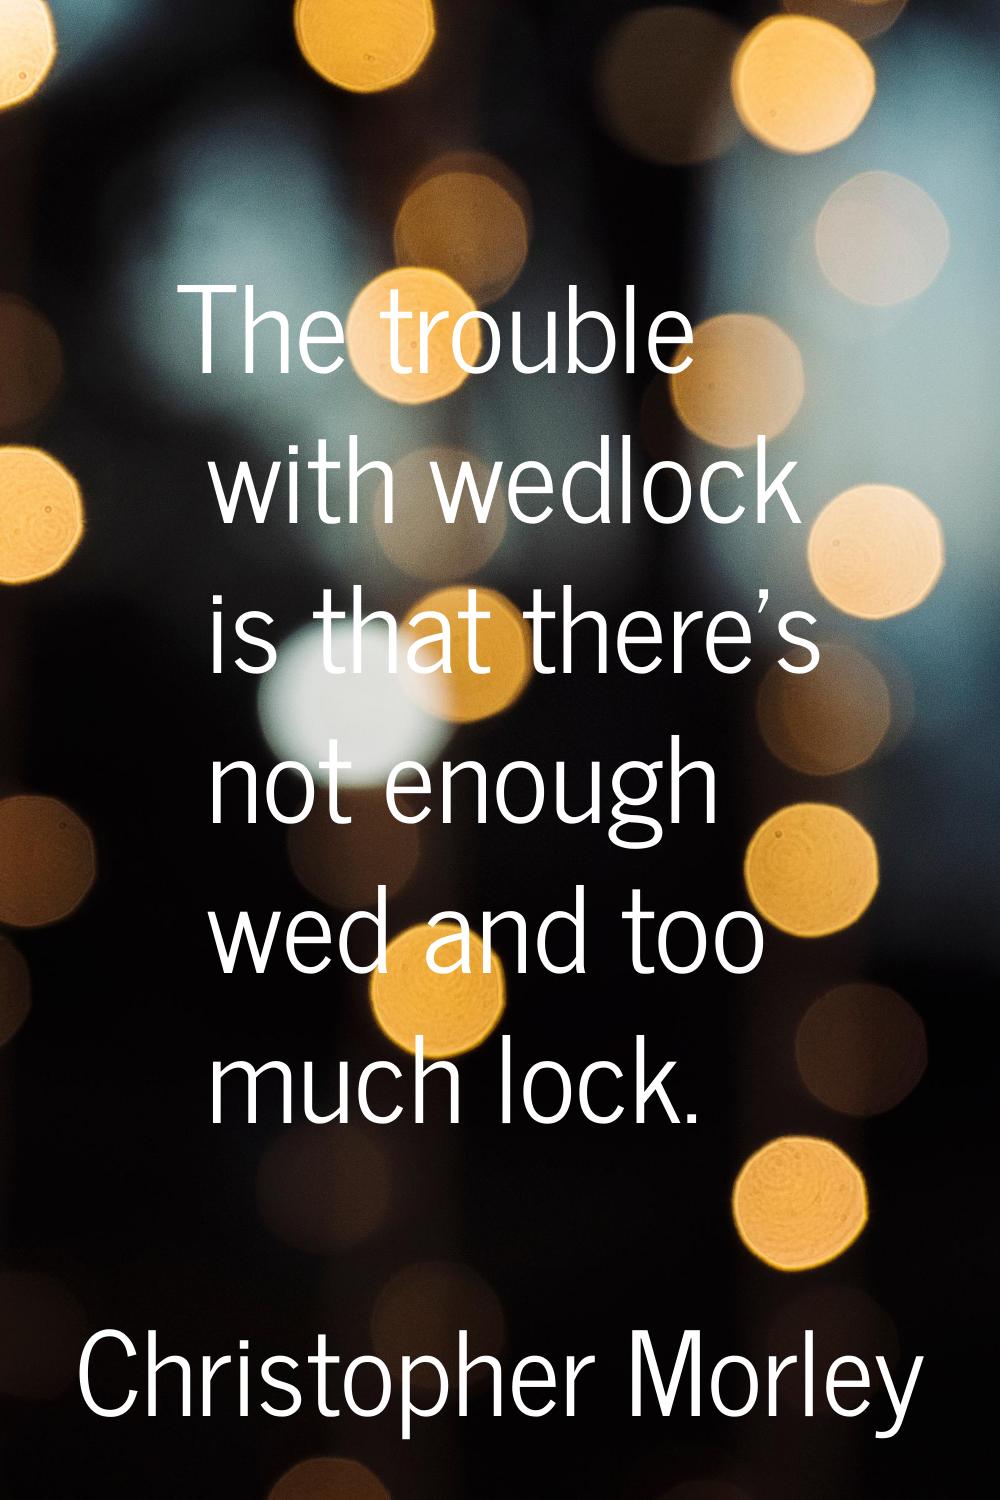 The trouble with wedlock is that there's not enough wed and too much lock.